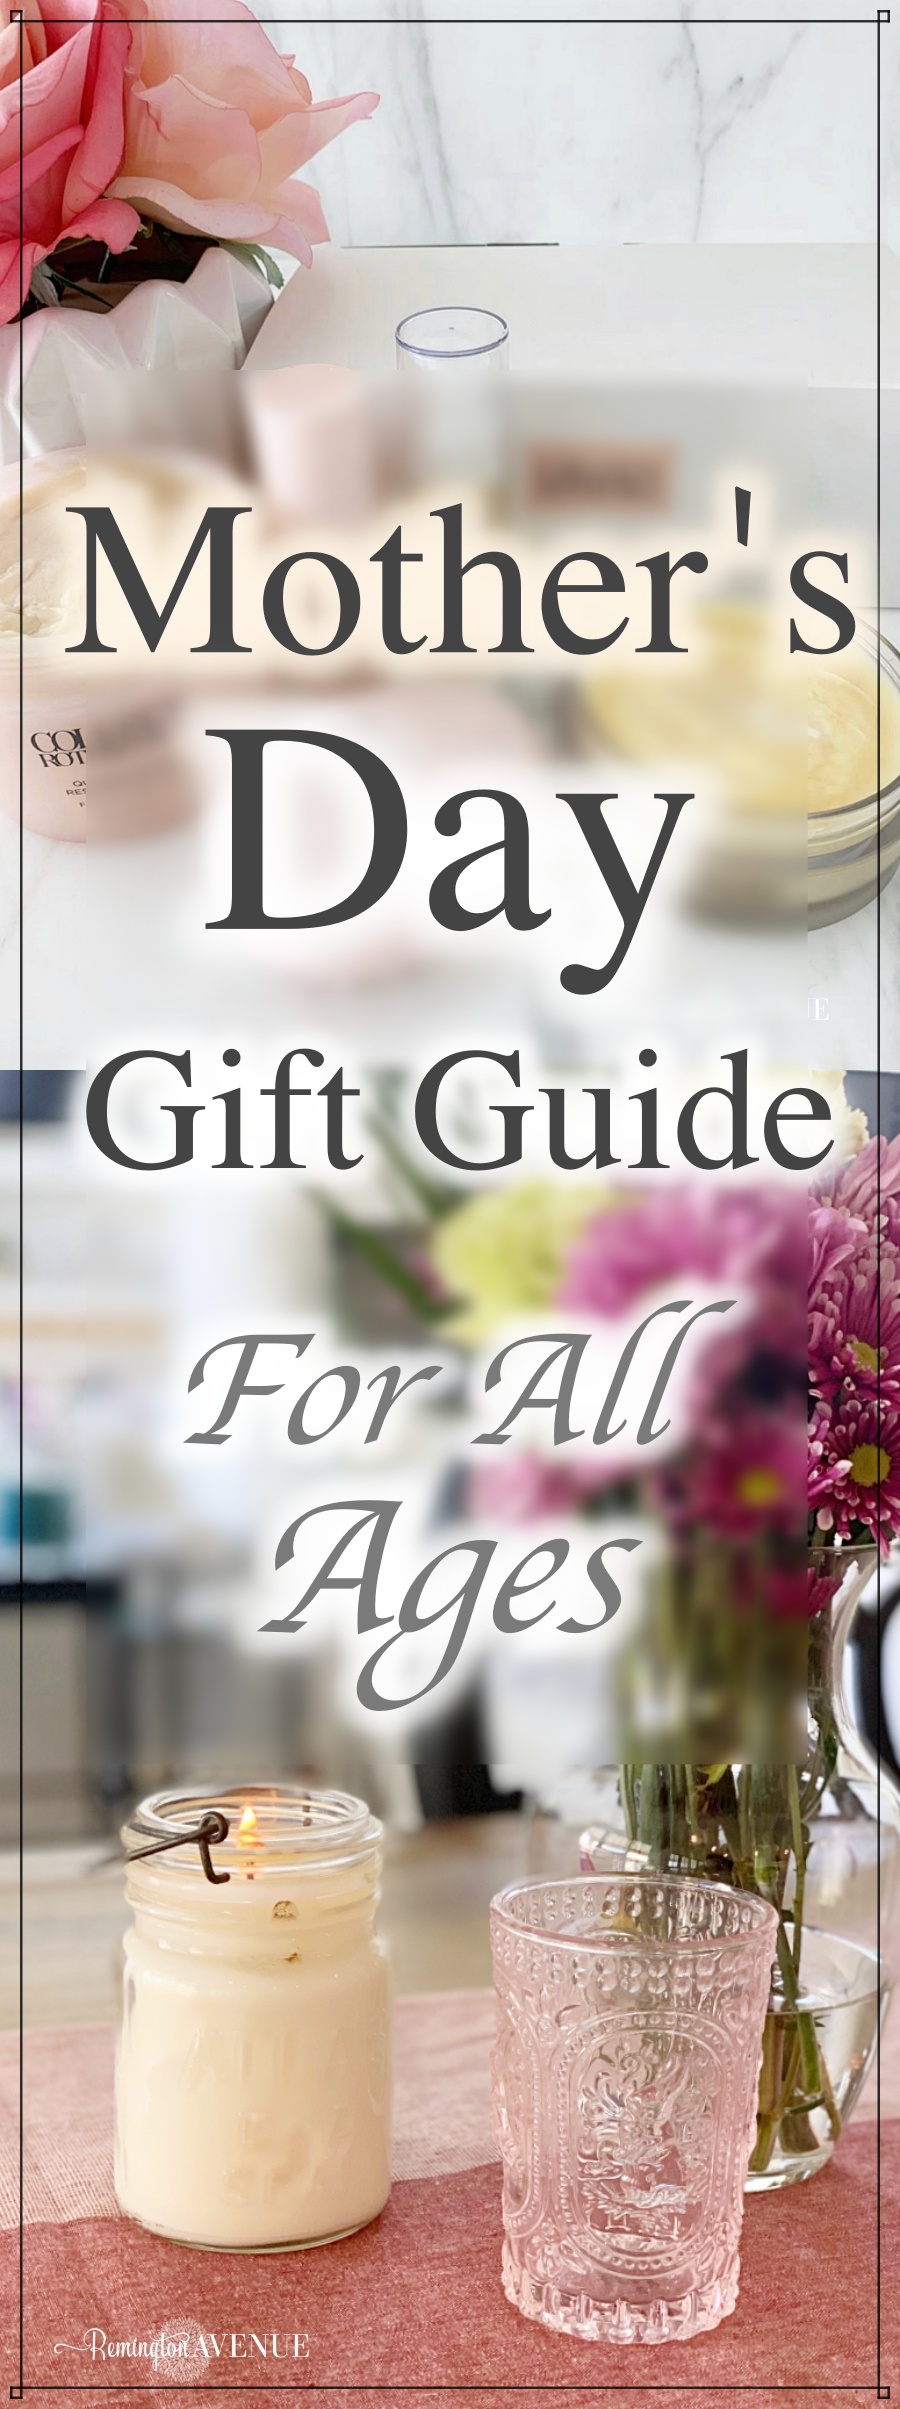 Mother's day gift guide for all ages 